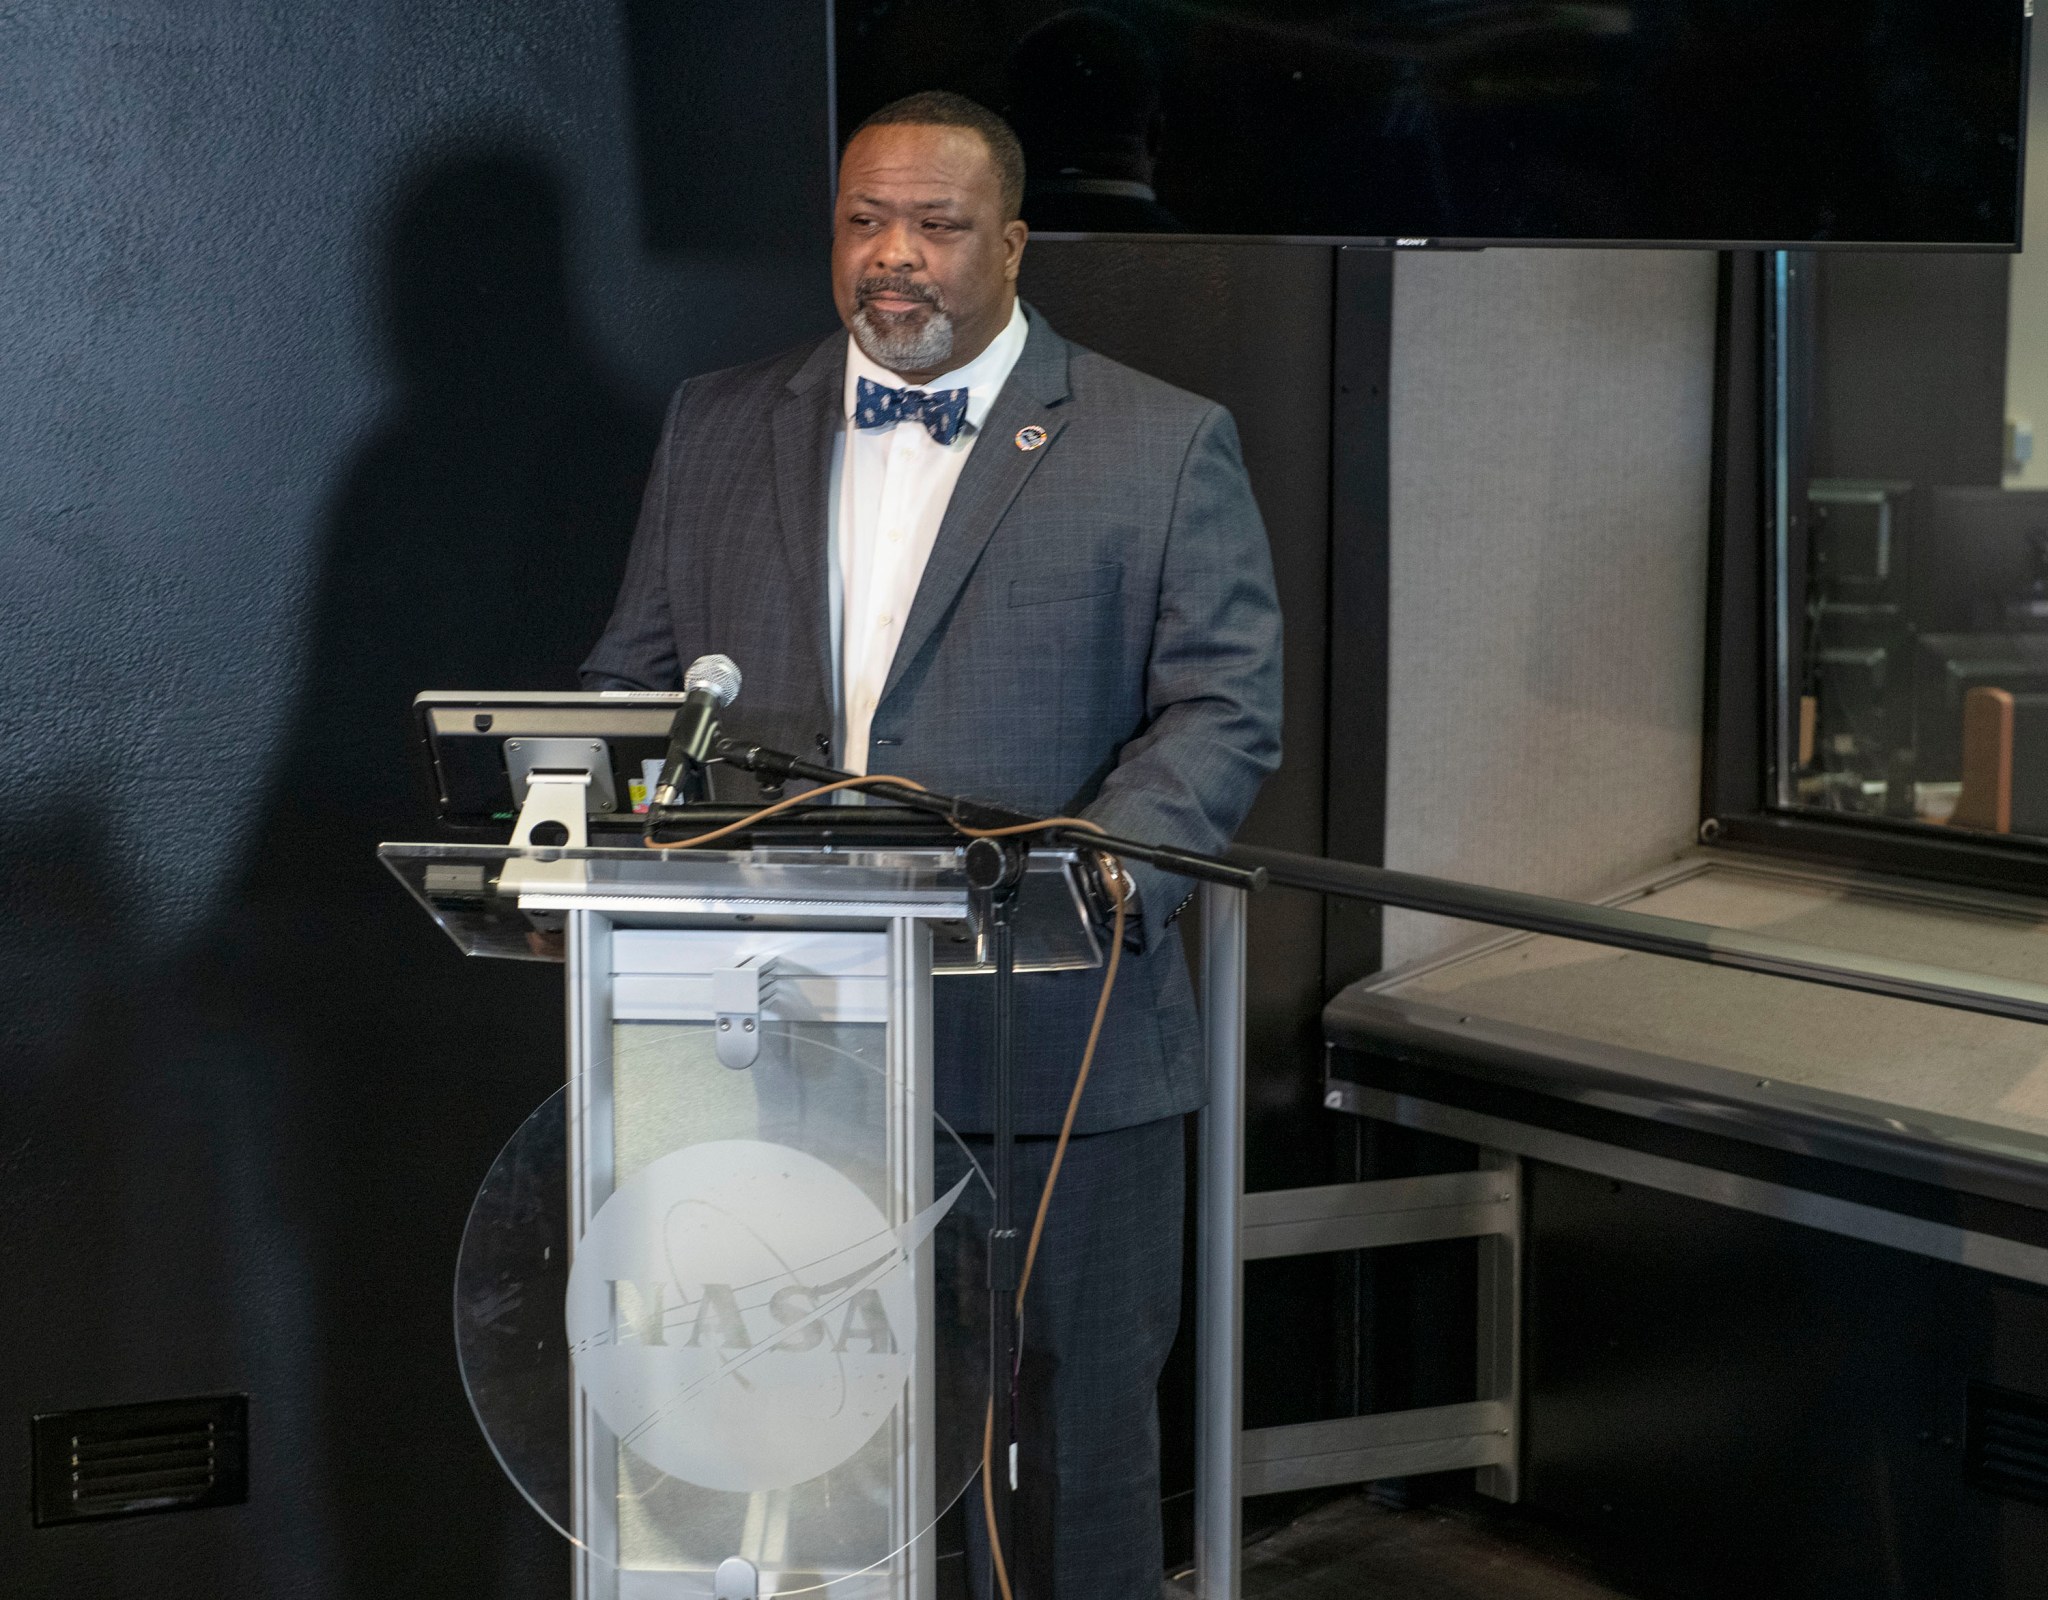 Dwight Mosby, manager of the Payload and Mission Operations Division for the International Space Station, welcomes scientists.